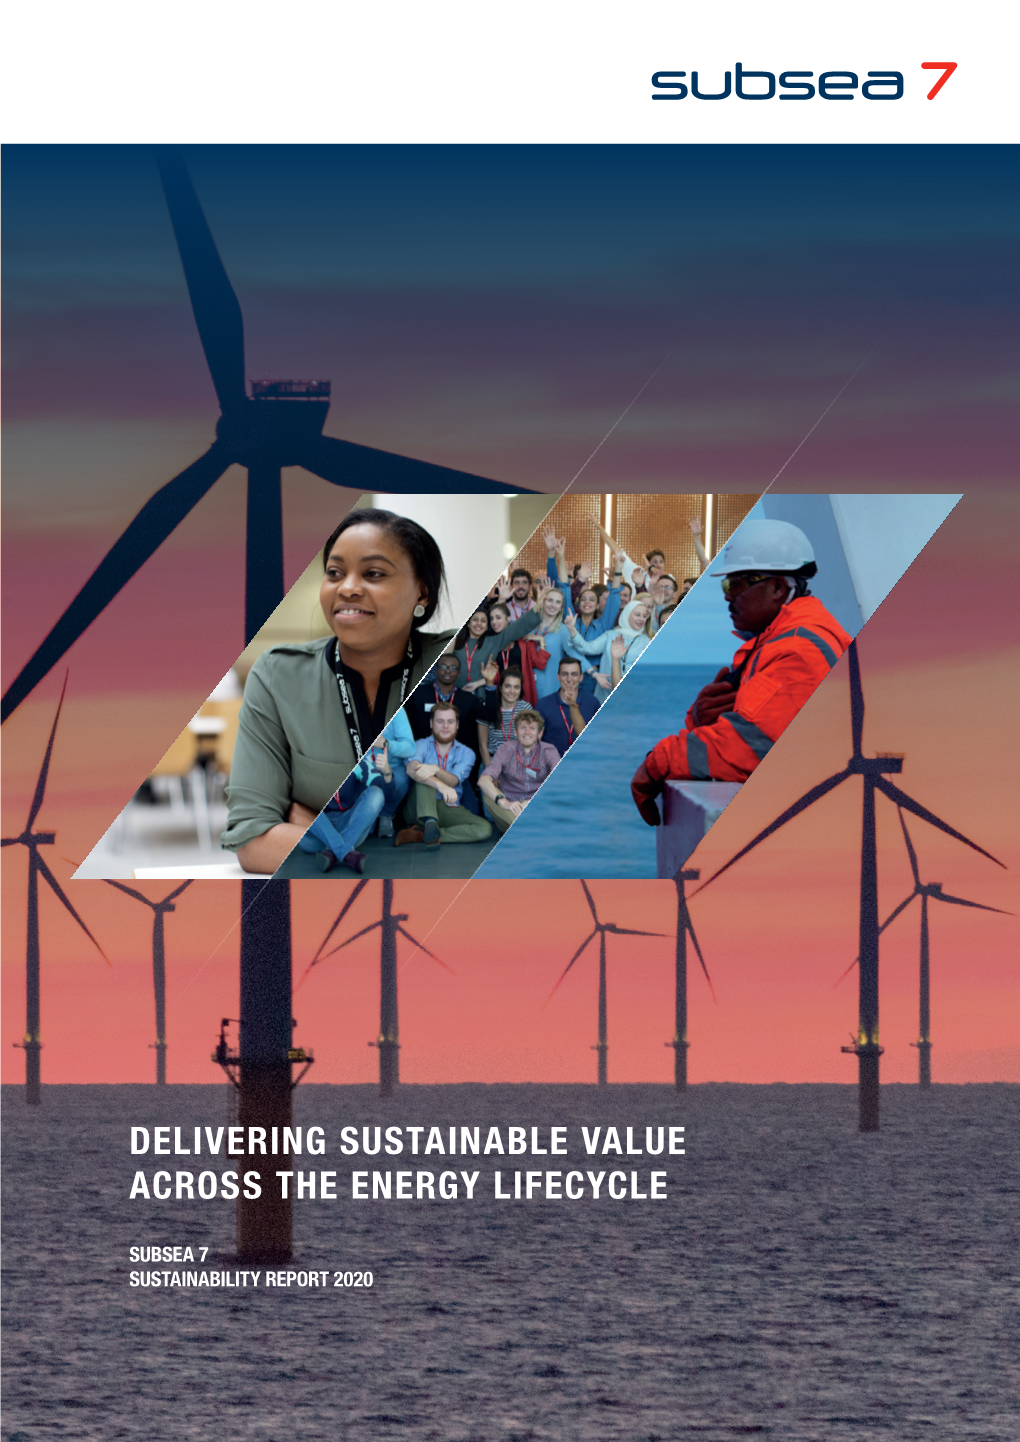 Delivering Sustainable Value Across the Energy Lifecycle